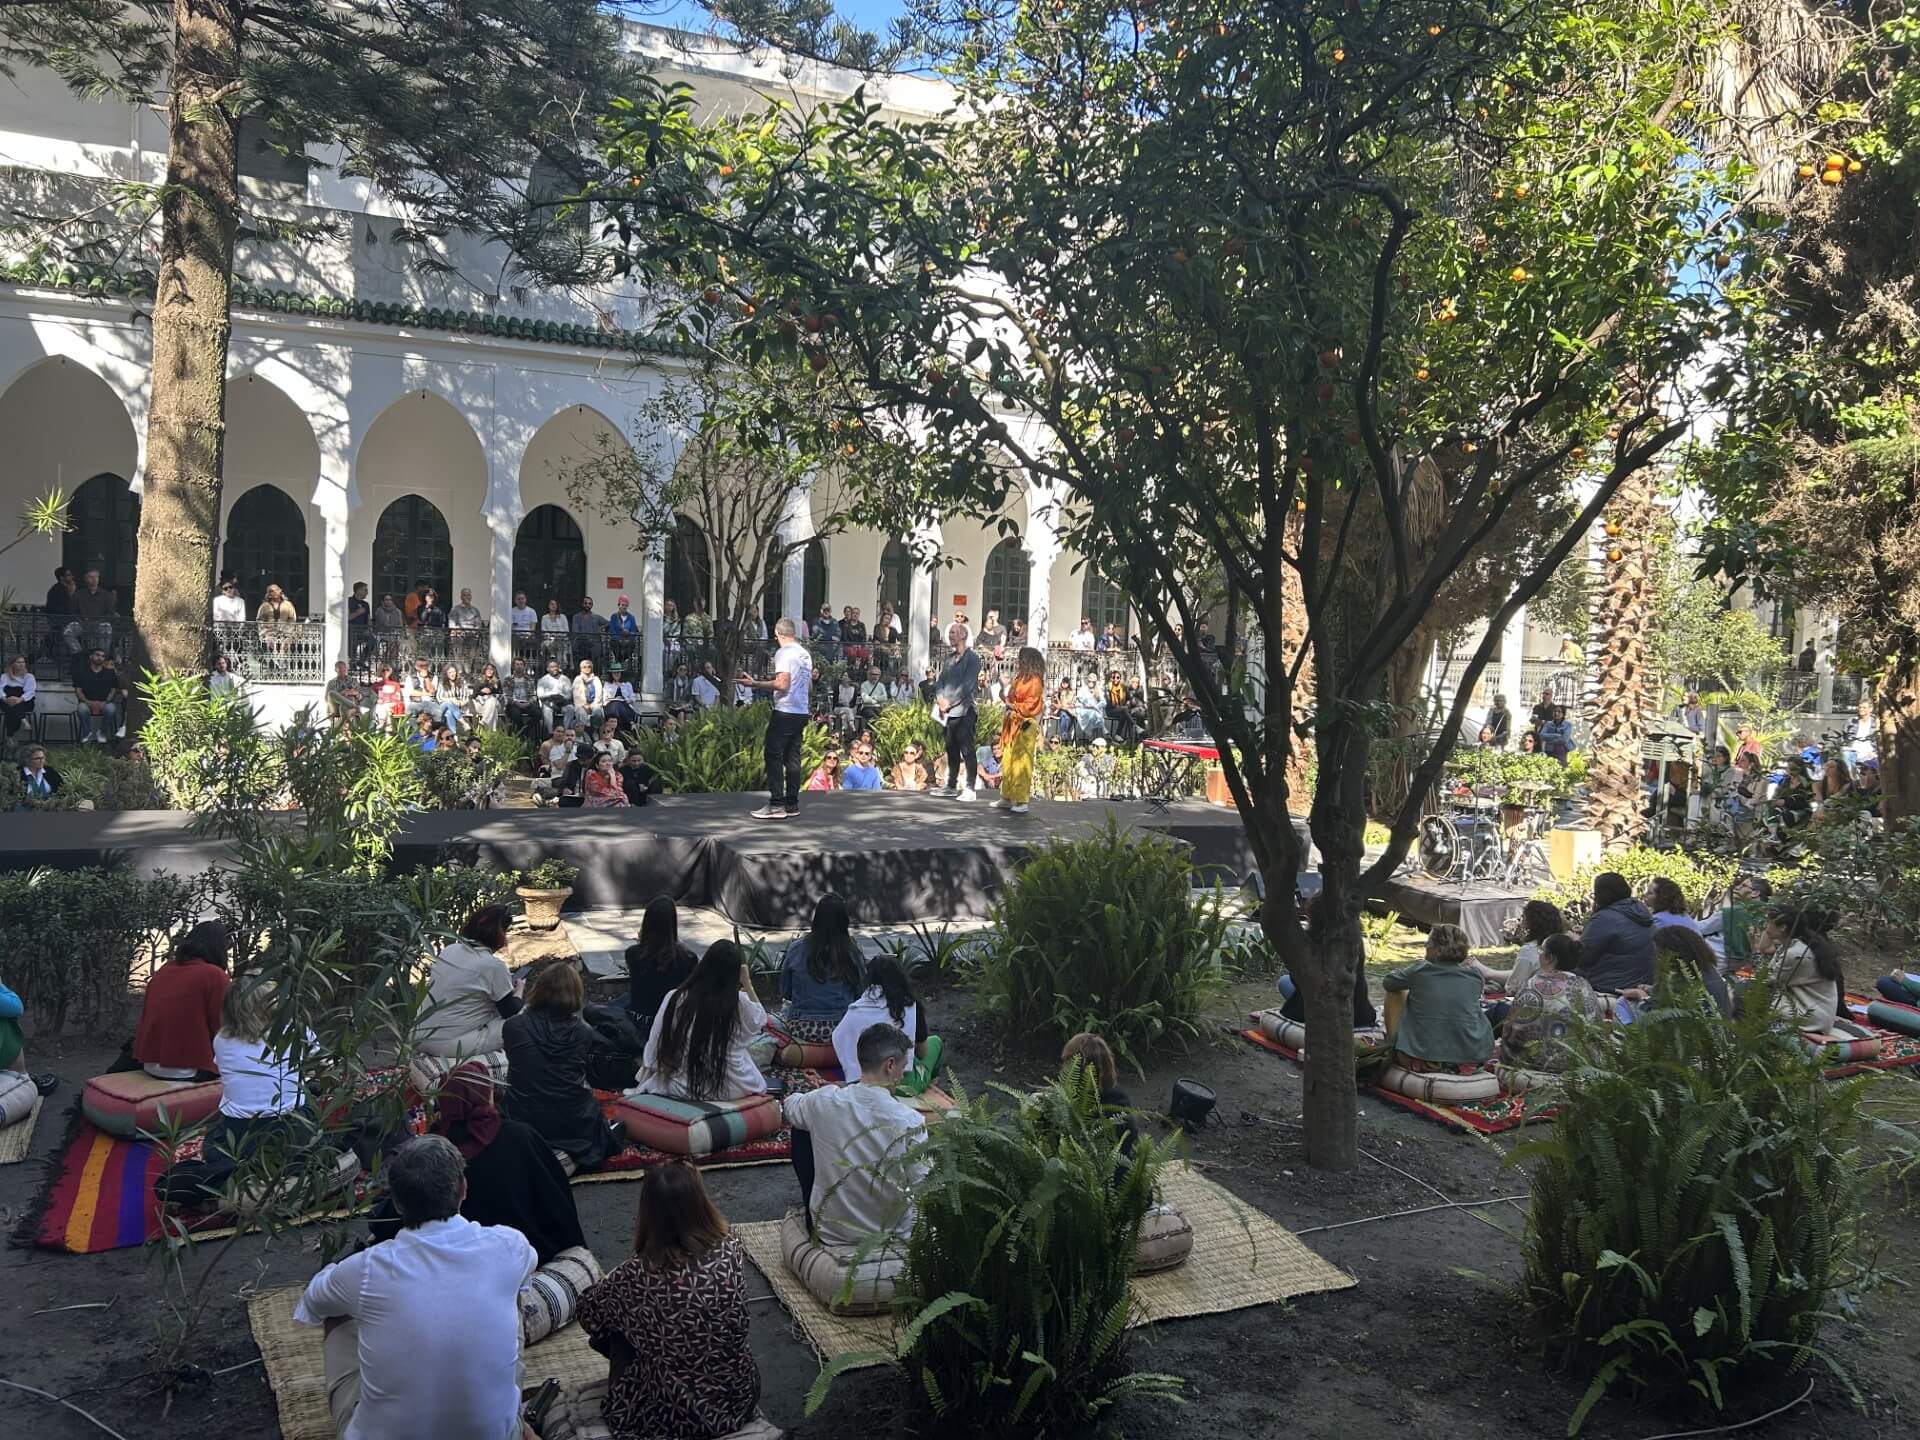 A group of some 30 plus people sat on Morroccan-style cushions in an open air courtyard in Tangiers. They are listening to speakers on a central stage. There are beautiful trees growing in the courtyard.